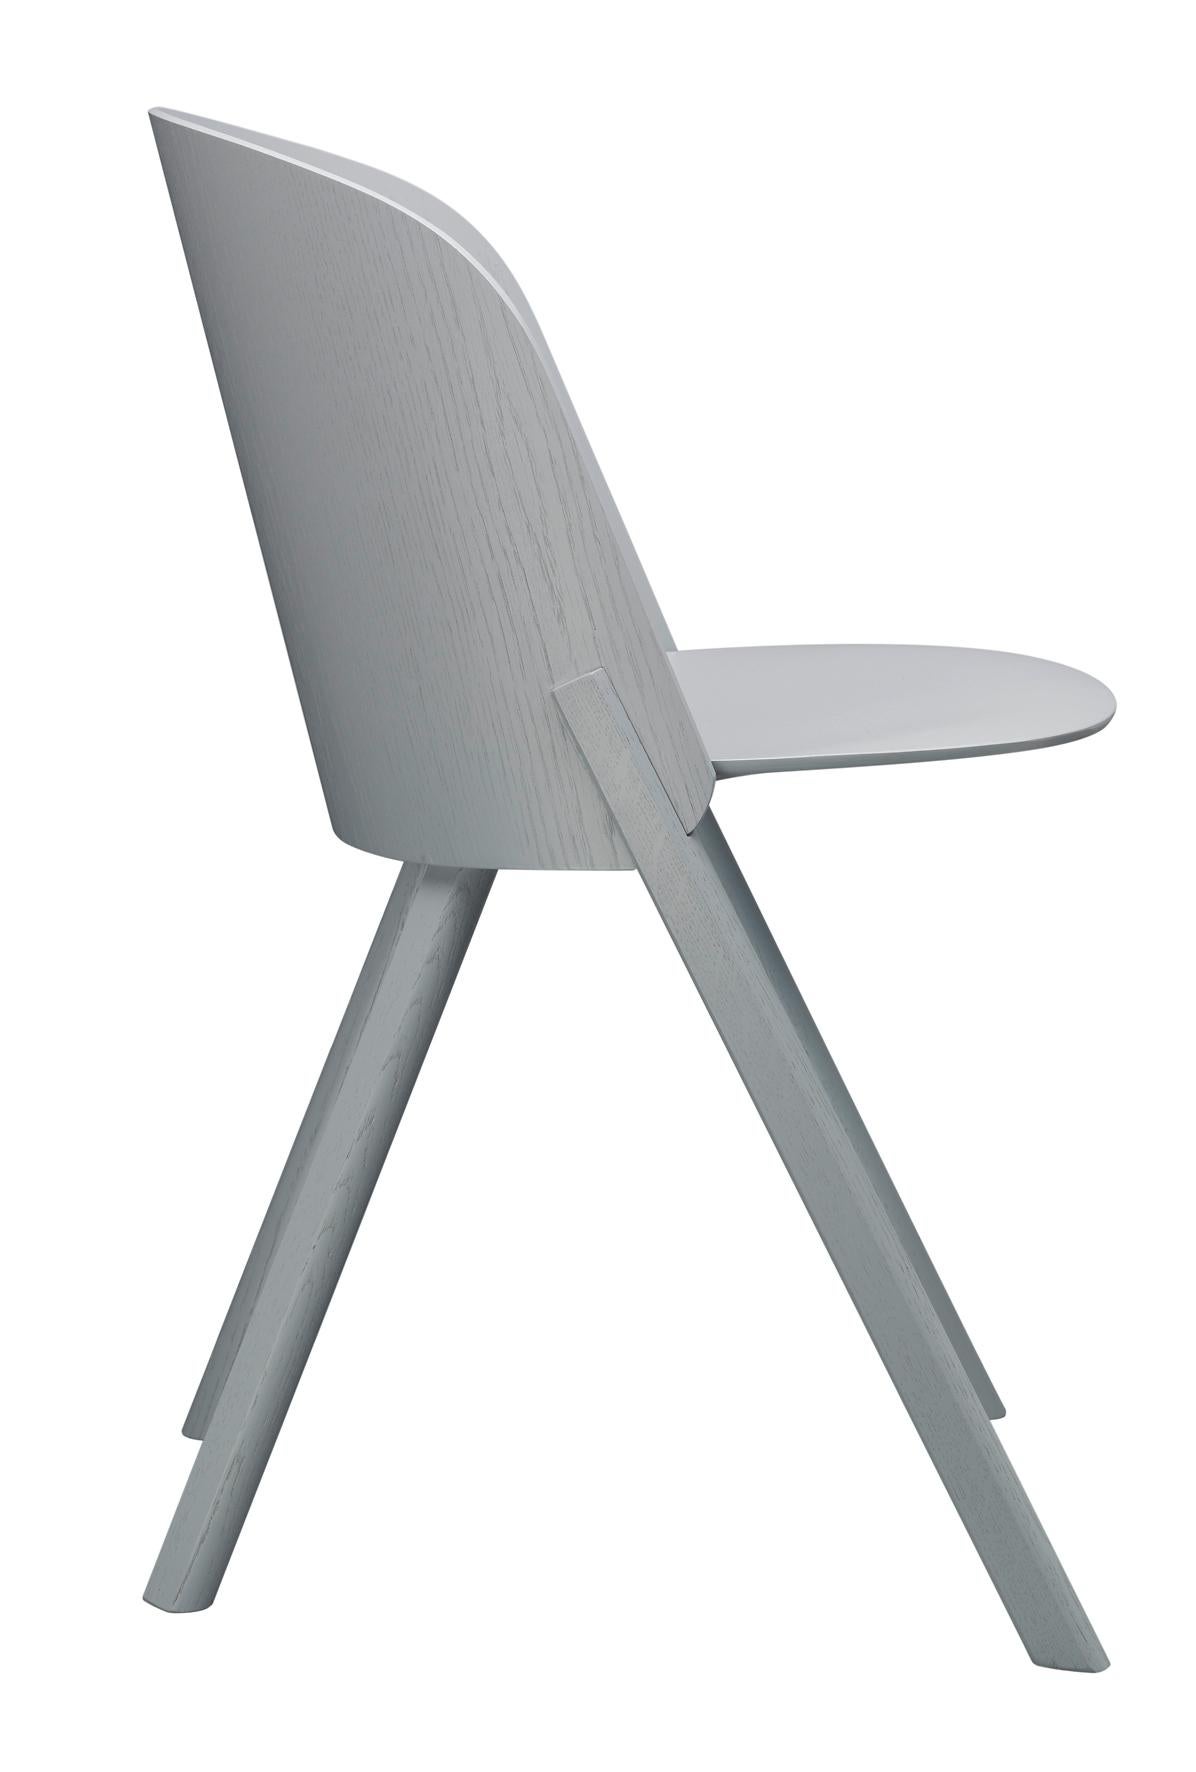 For Sale: Gray (Traffic Gray Lacquer) e15 This Side Chair by Stefan Diez 2